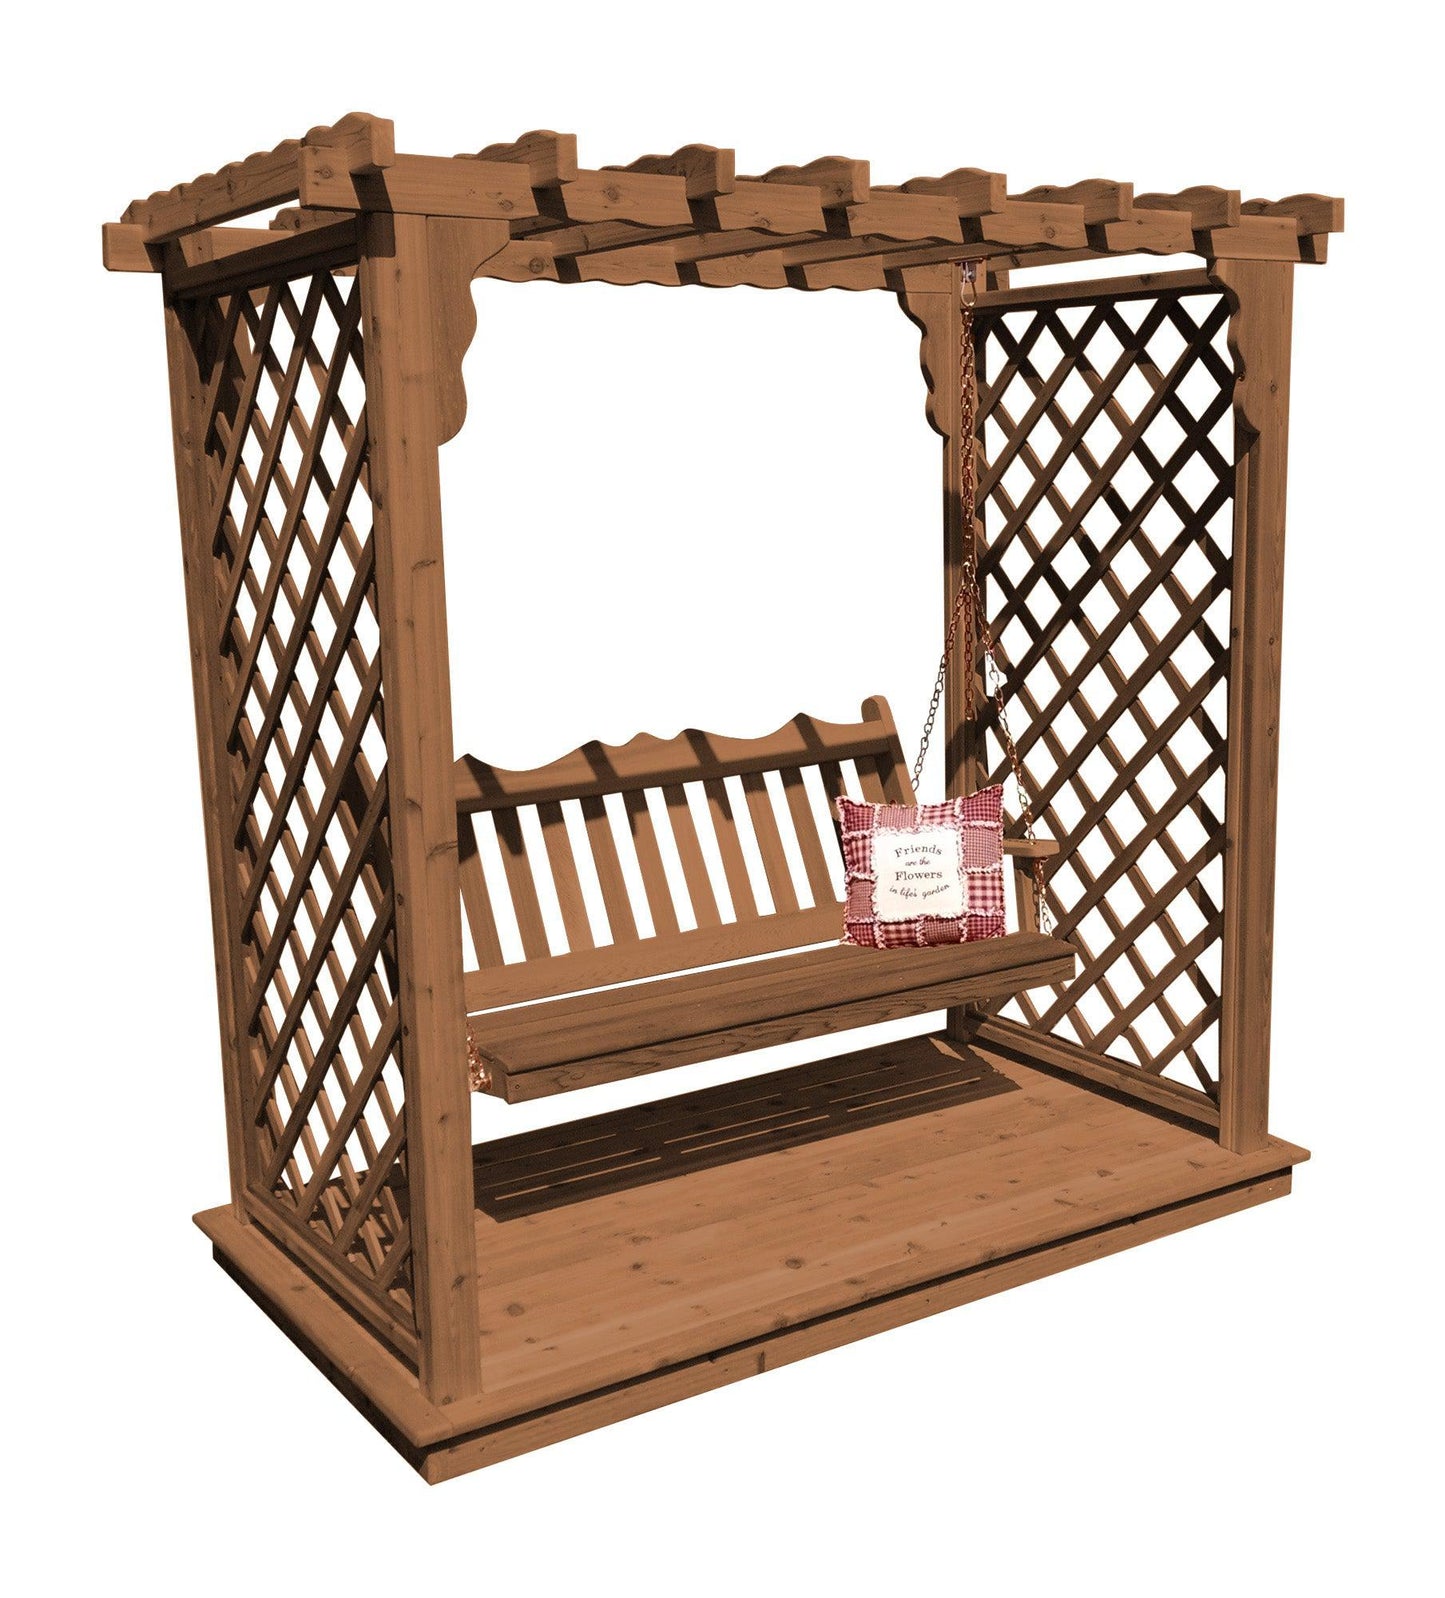 A&L FURNITURE CO. 5' Covington Pressure Treated Pine Arbor w/ Deck & Swing - LEAD TIME TO SHIP 10 BUSINESS DAYS